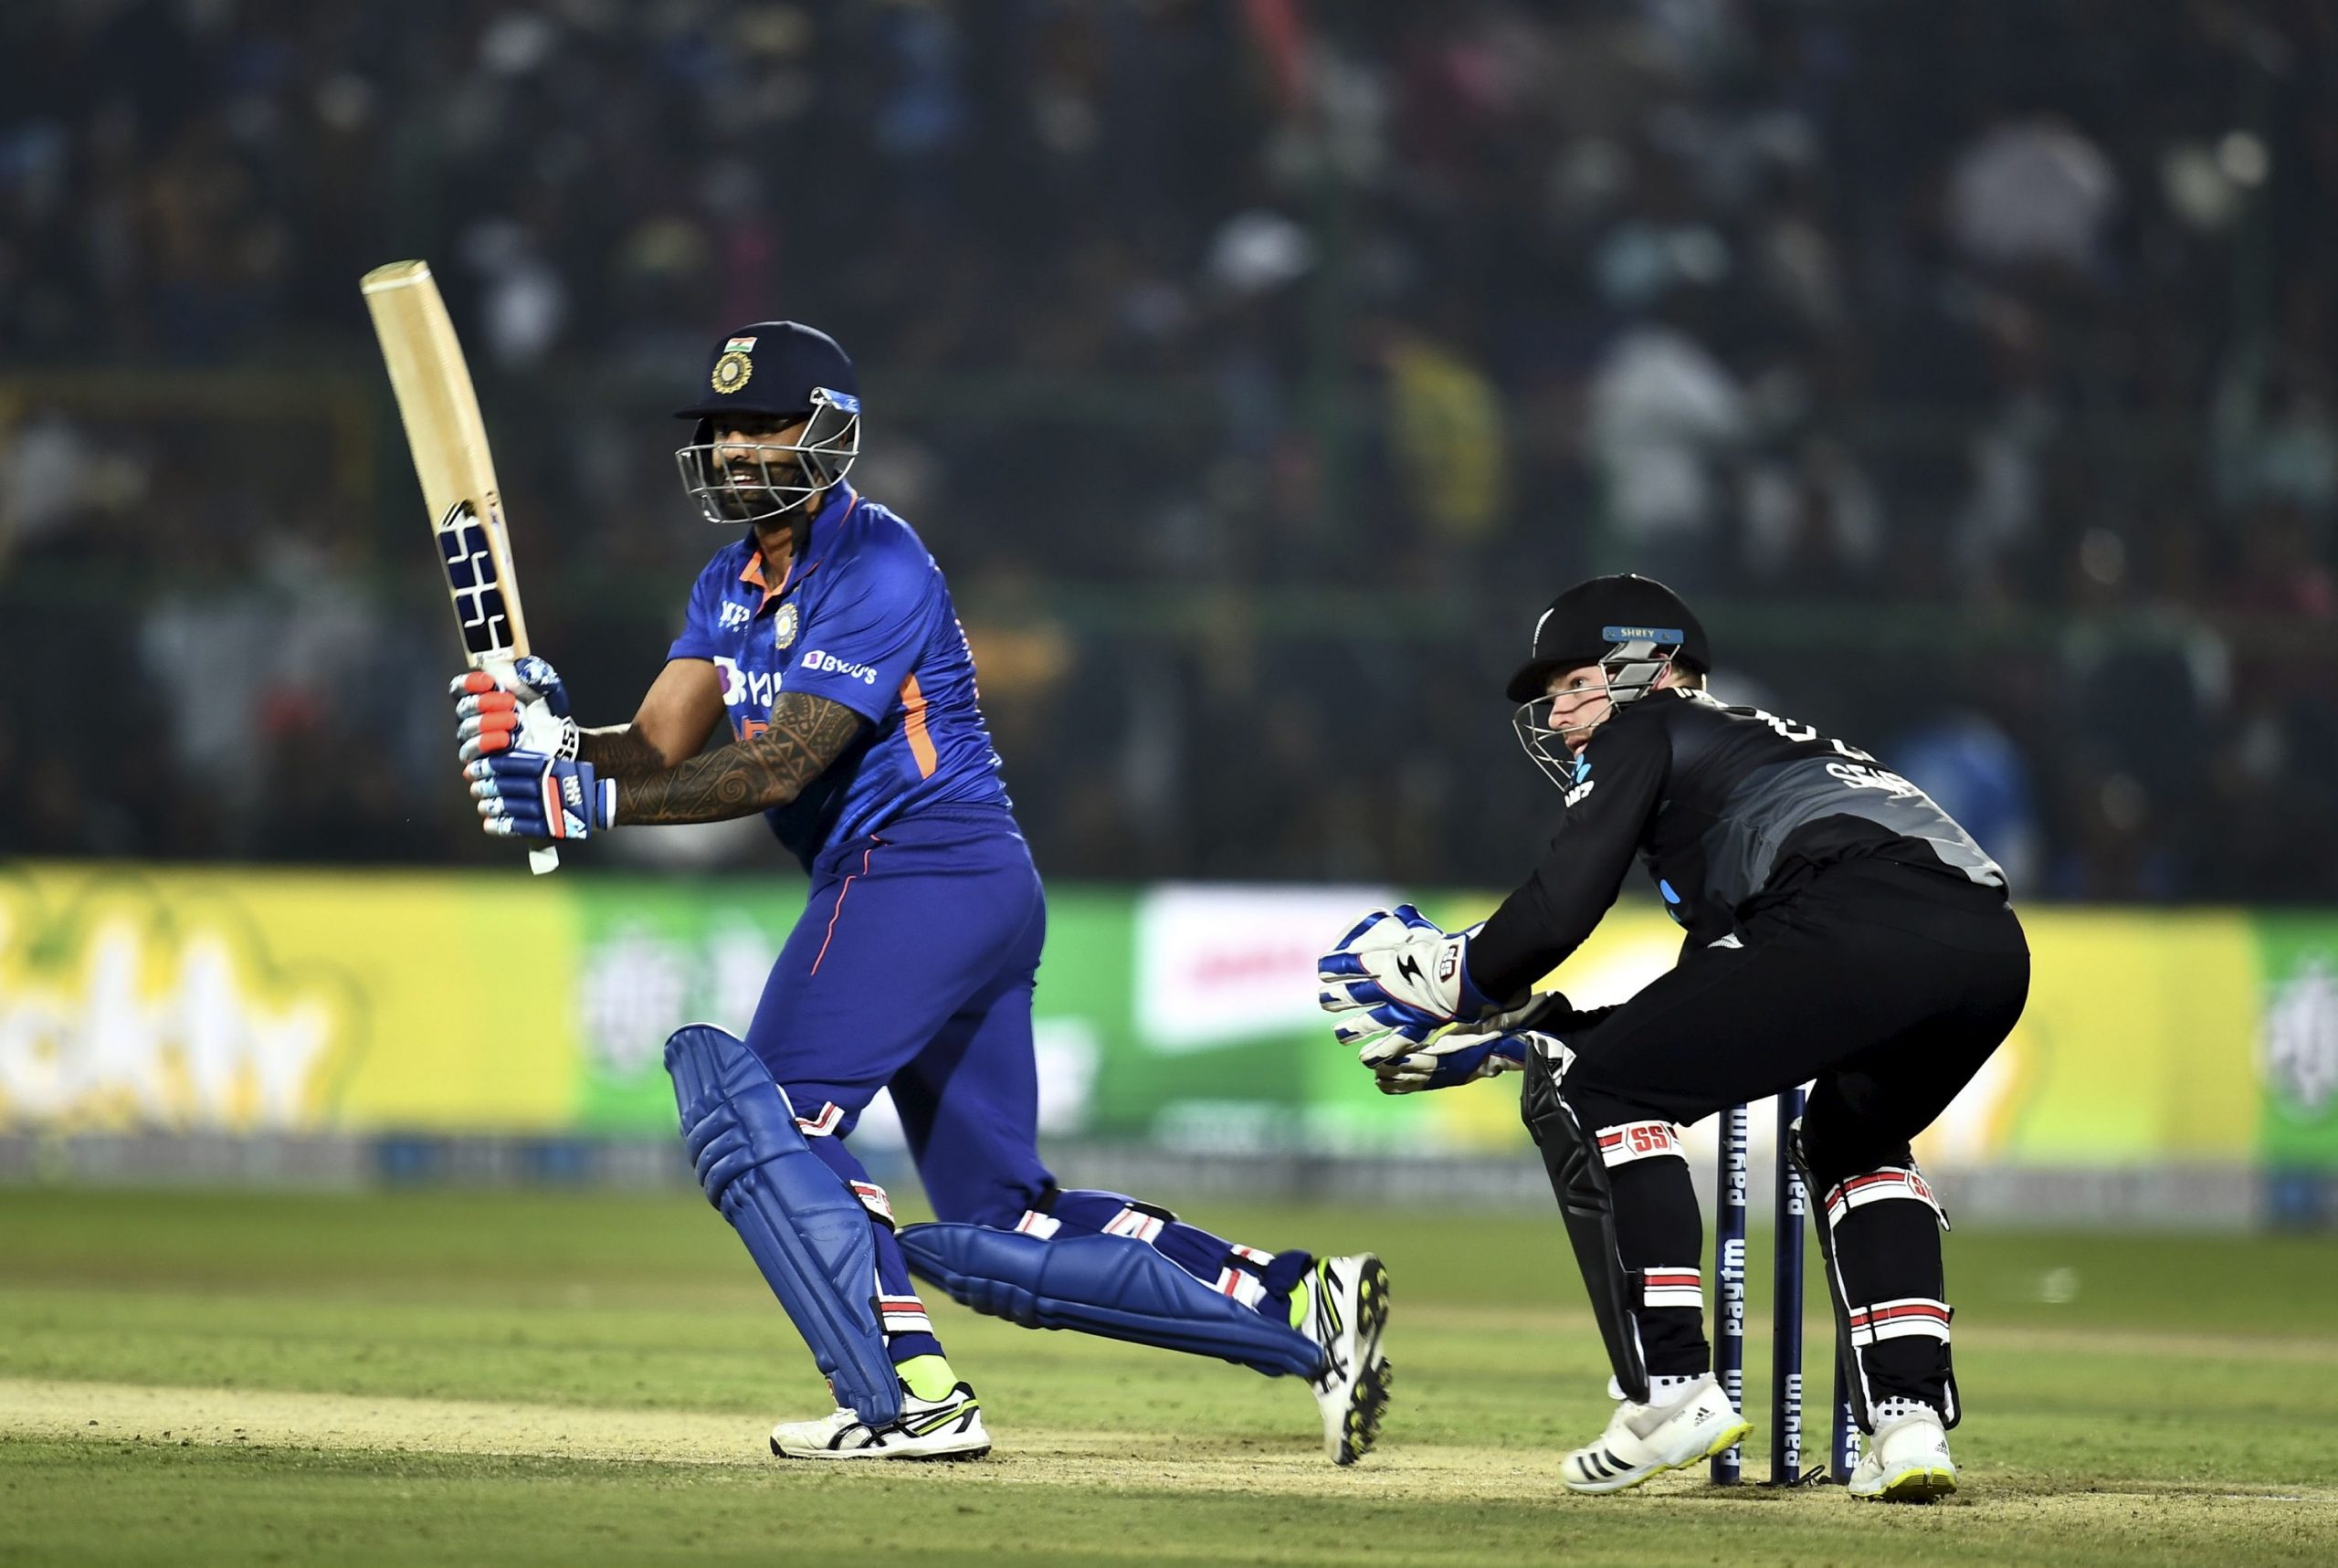 India vs New Zealand 2nd T20I: When and where to watch live telecast, streaming